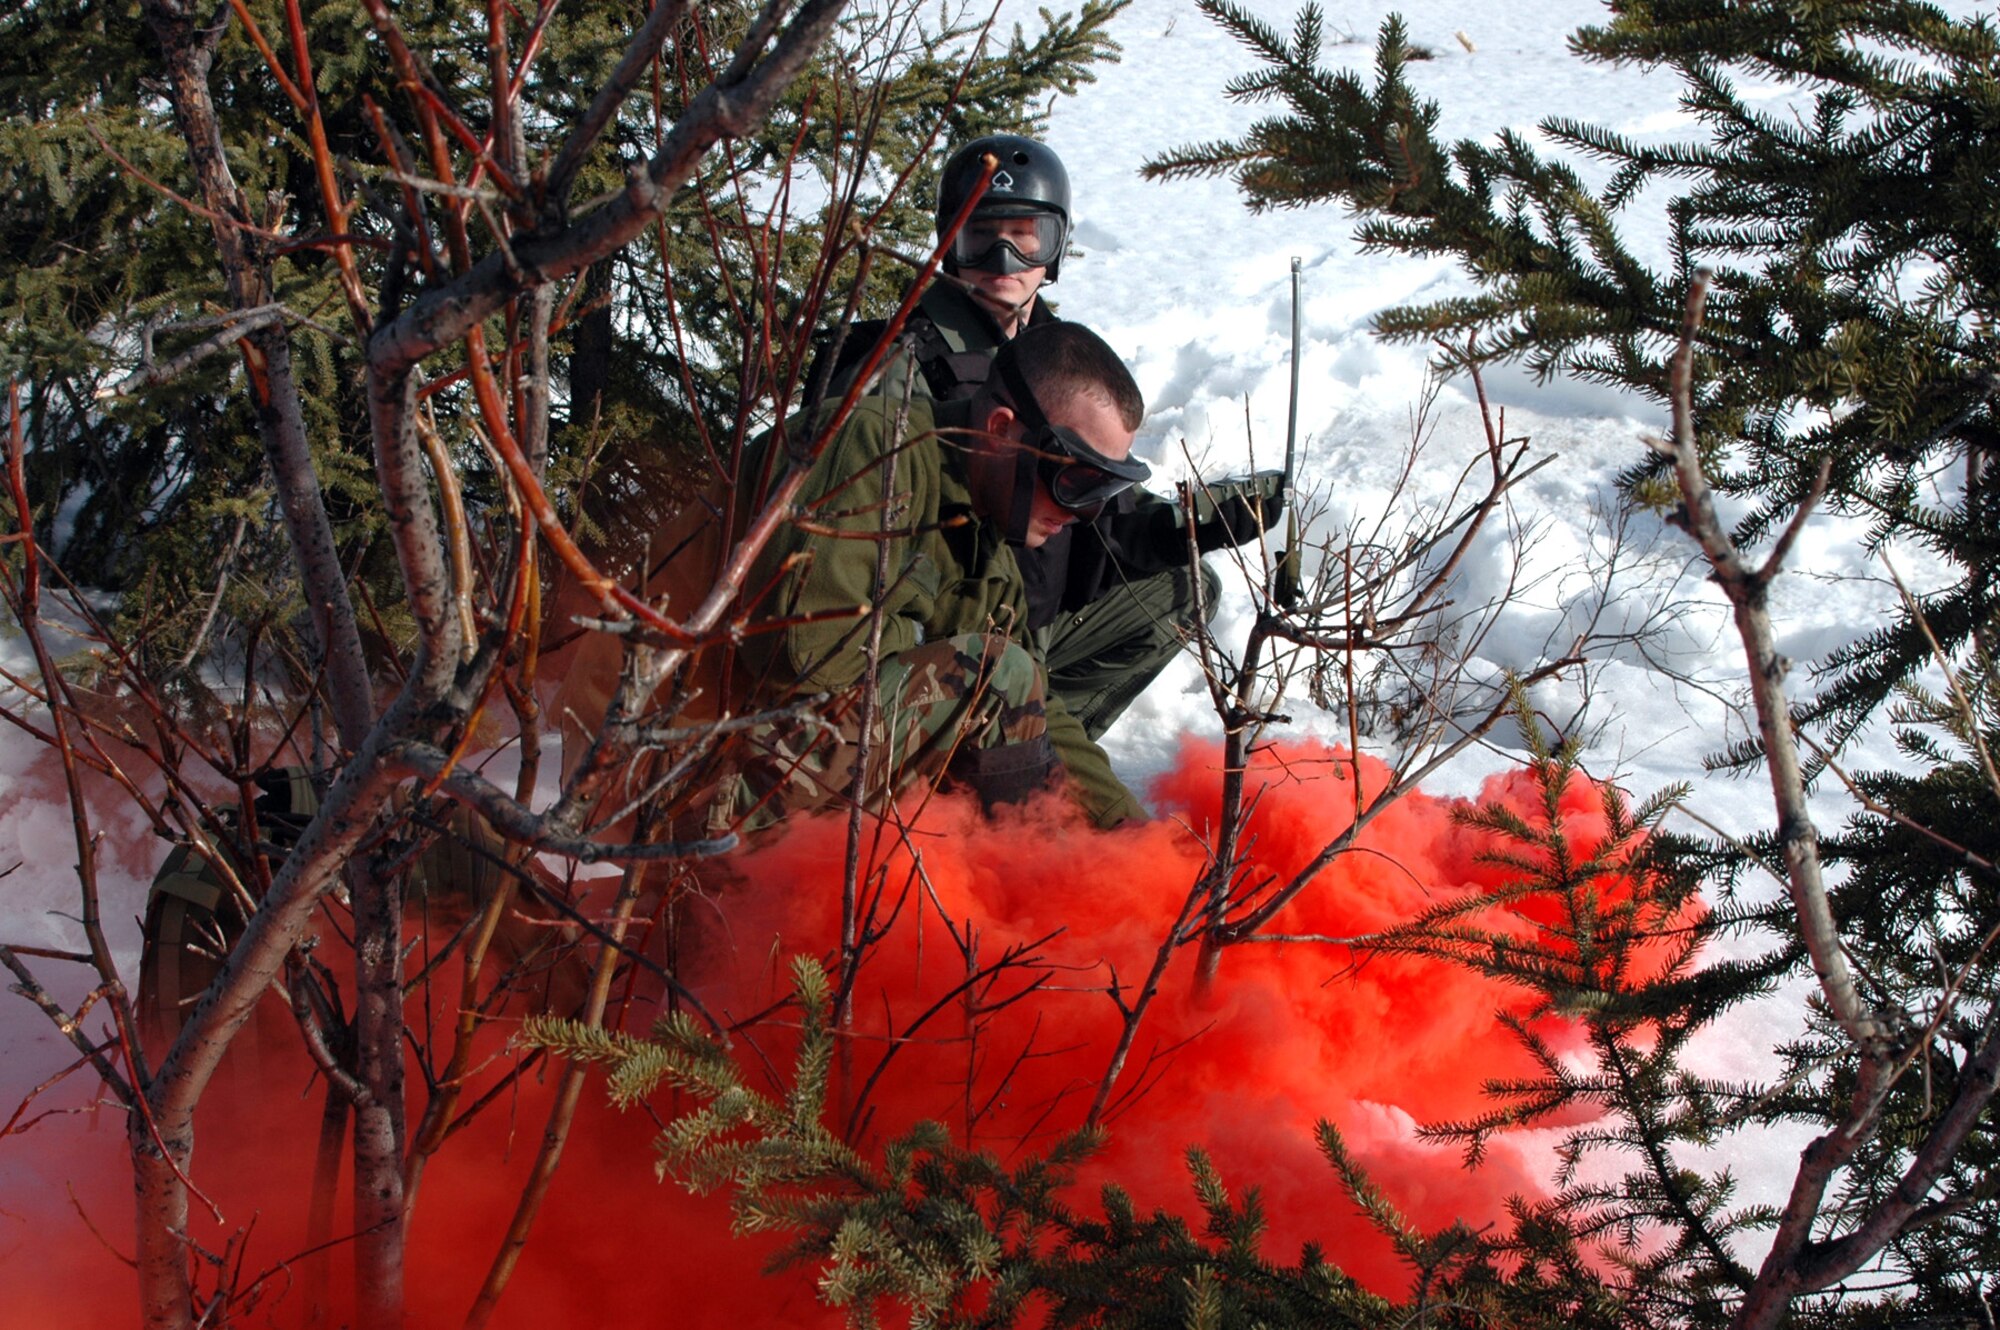 Staff Sgt. Marc Richard (front) pops red smoke as Capt. Ryan Pumford watches for a recovery vehicle during combat search and rescue training at Eielson Air Force Base, Alaska, on Tuesday, May 2, 2006, during Red Flag-Alaska. Sergeant Richard is a survival, evasion, rescue and escape specialist with Detachment 1 of the 353rd Combat Training Squadron at Elmendorf AFB, Alaska. Captain Pumford is an F-16 pilot with the 18th Fighter Squadron at Eielson. (U.S. Air Force photo/Tech. Sgt. Jeff Walston)